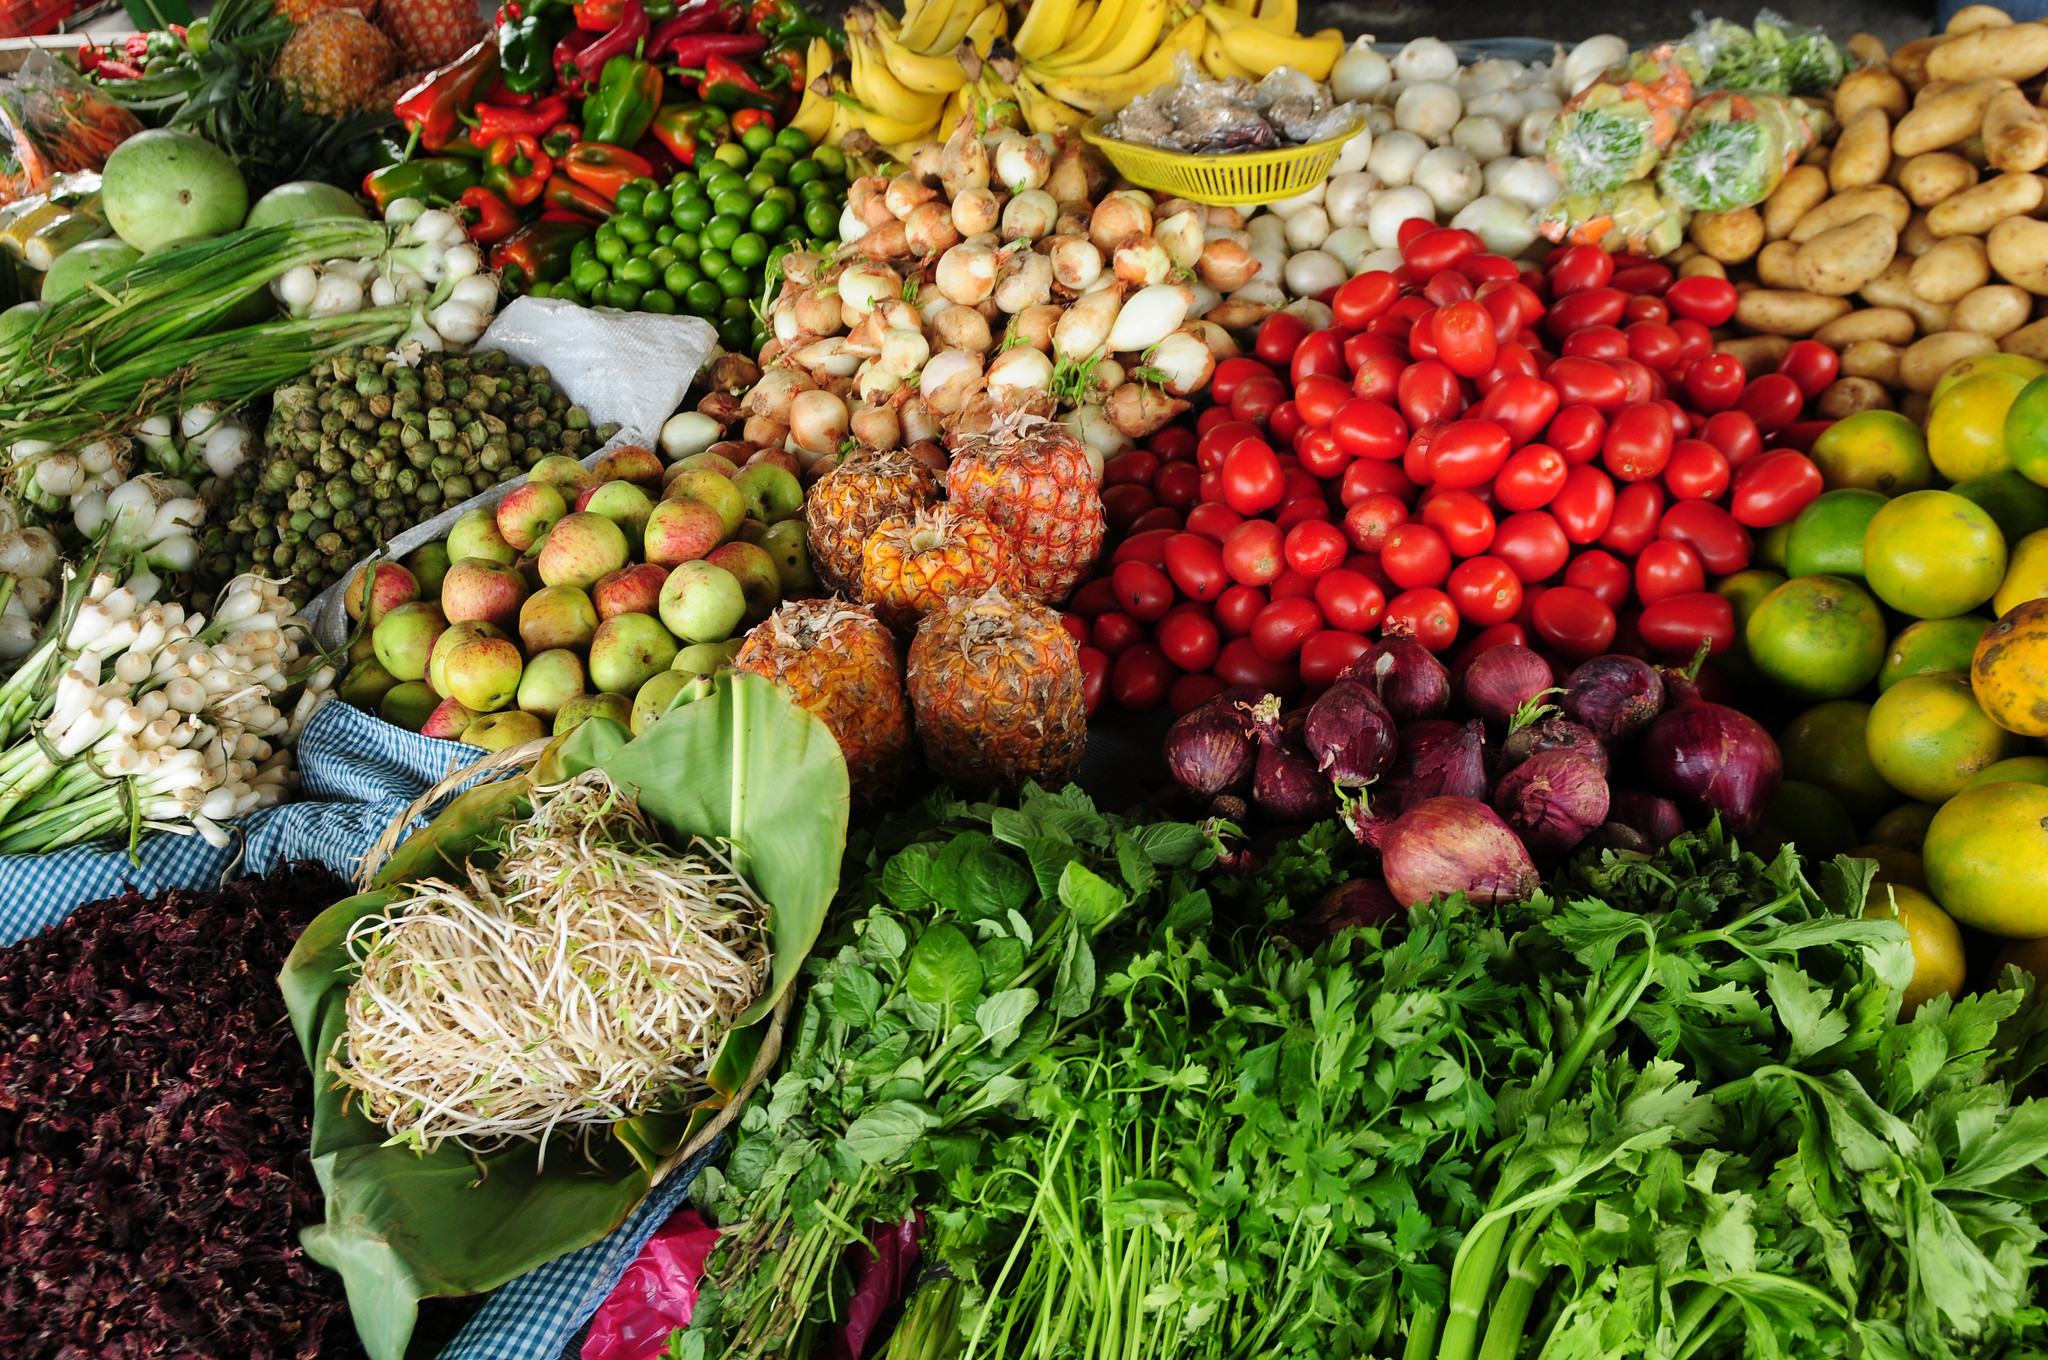 Photo of fruits and vegetables at a market